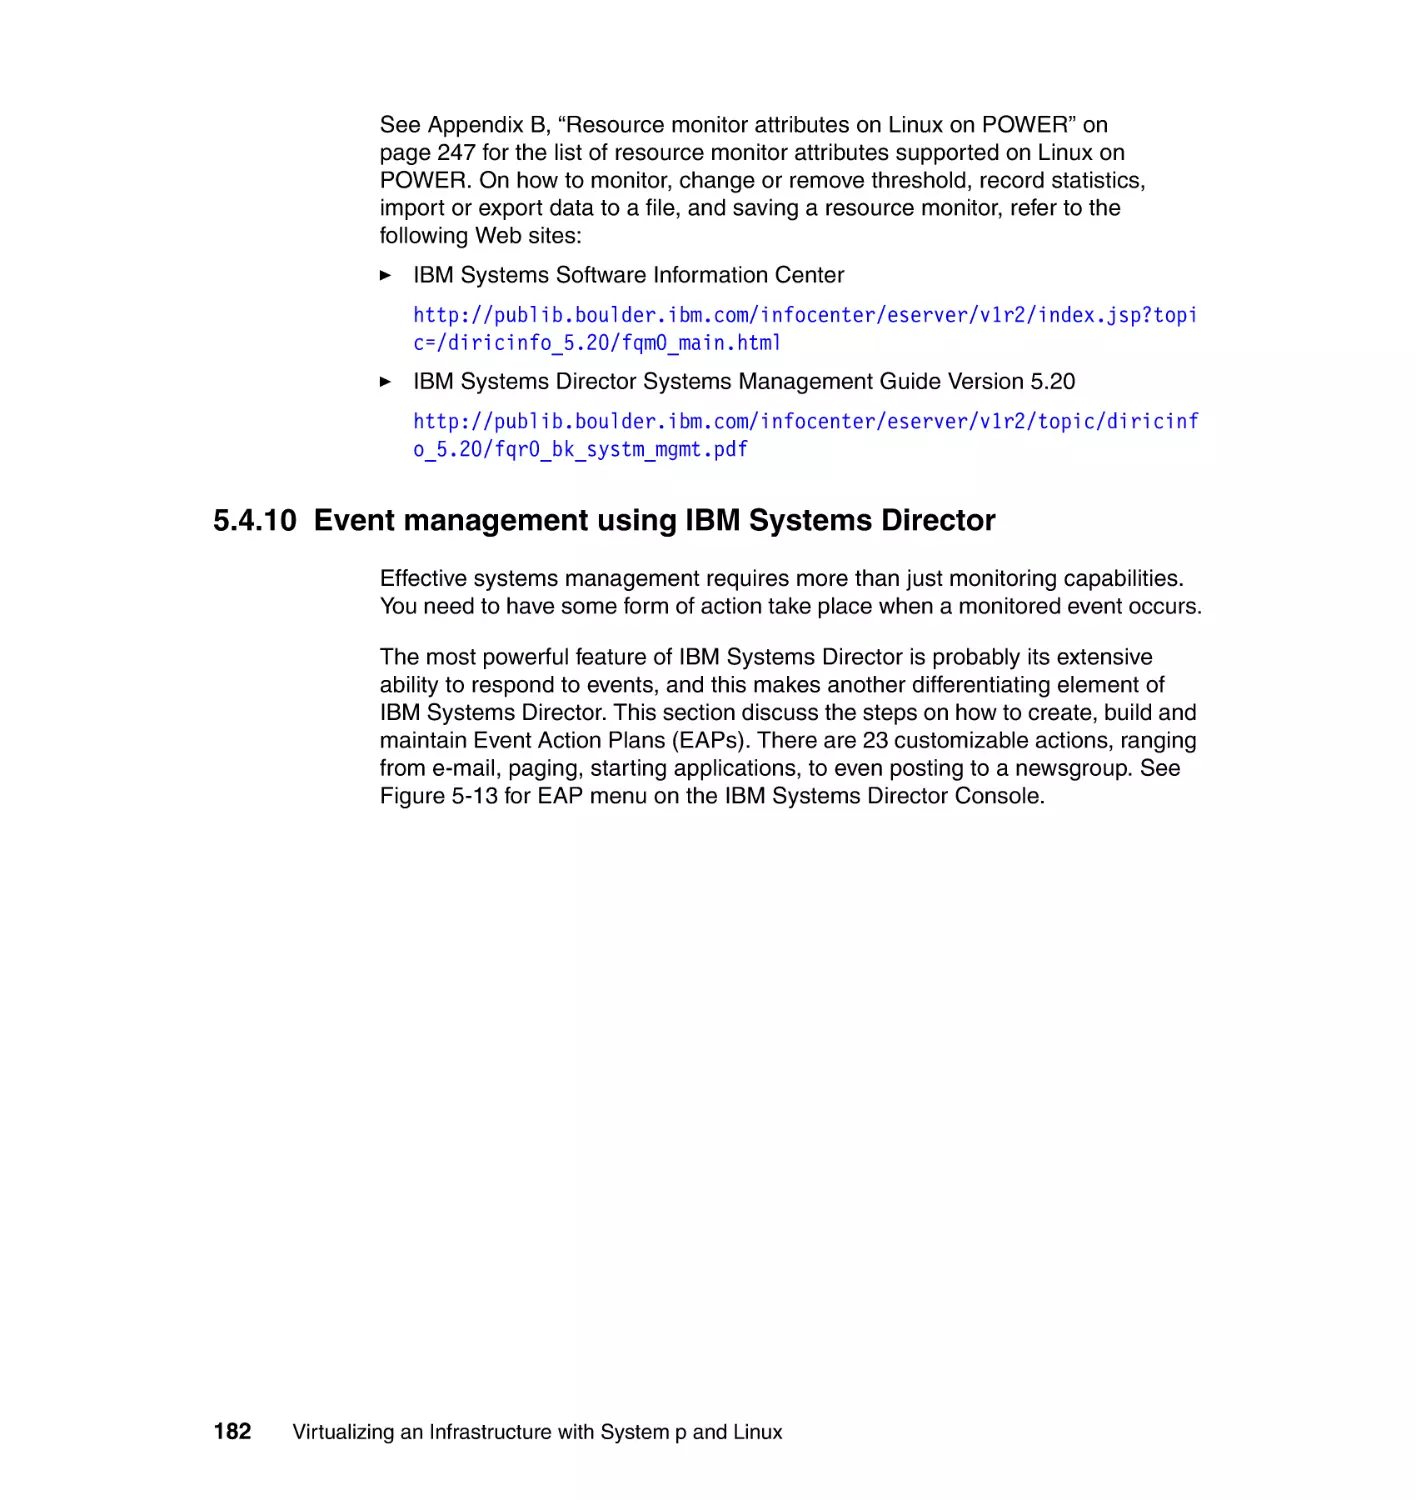 5.4.10 Event management using IBM Systems Director